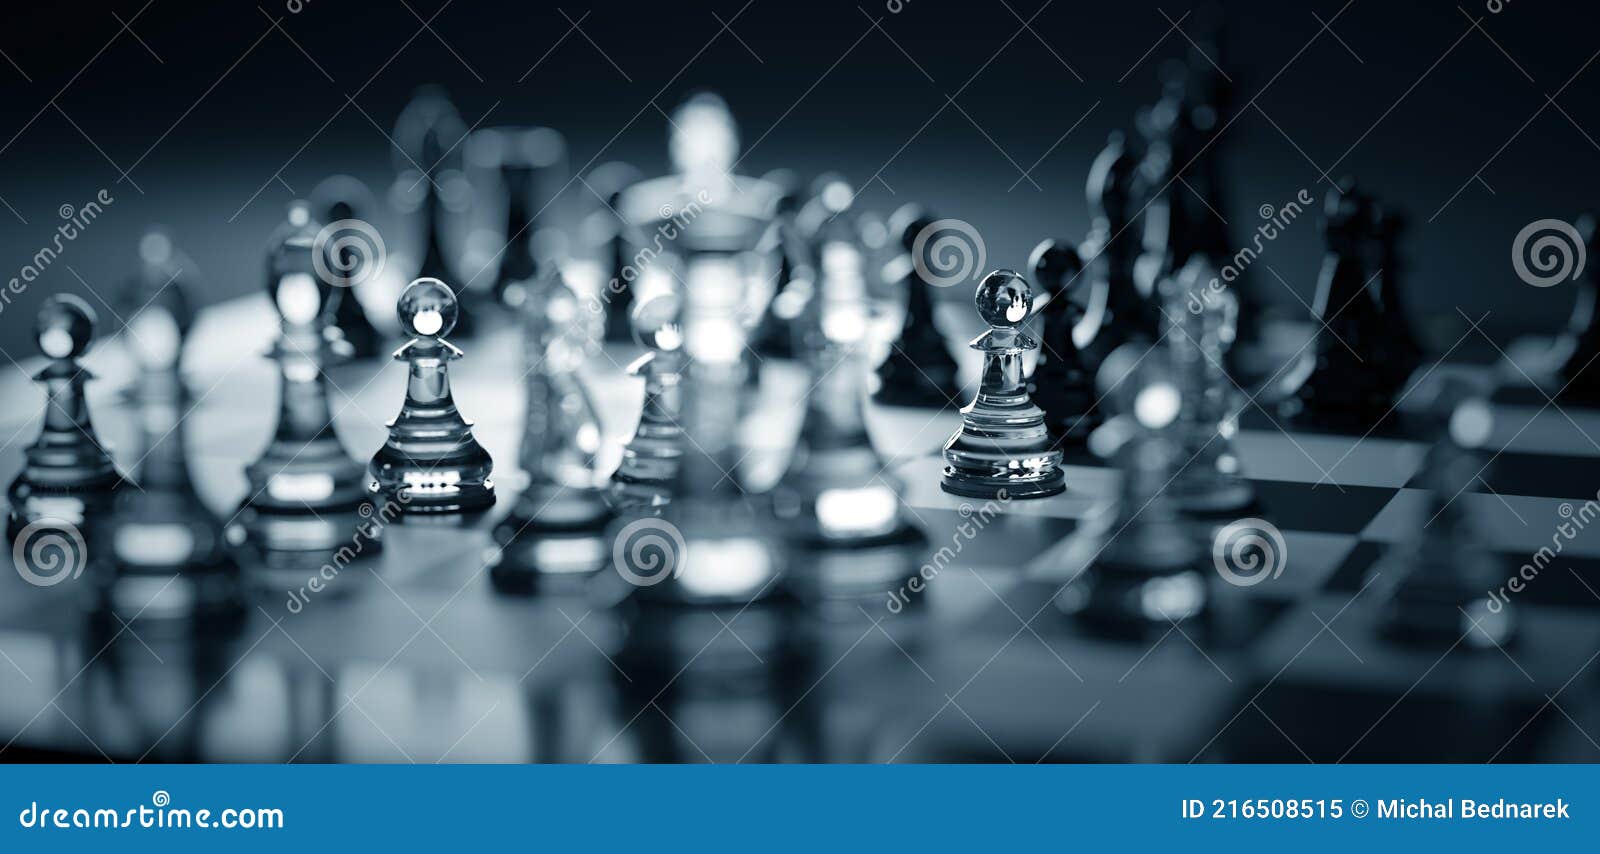 chess game. strategic desicion making. plan and competition